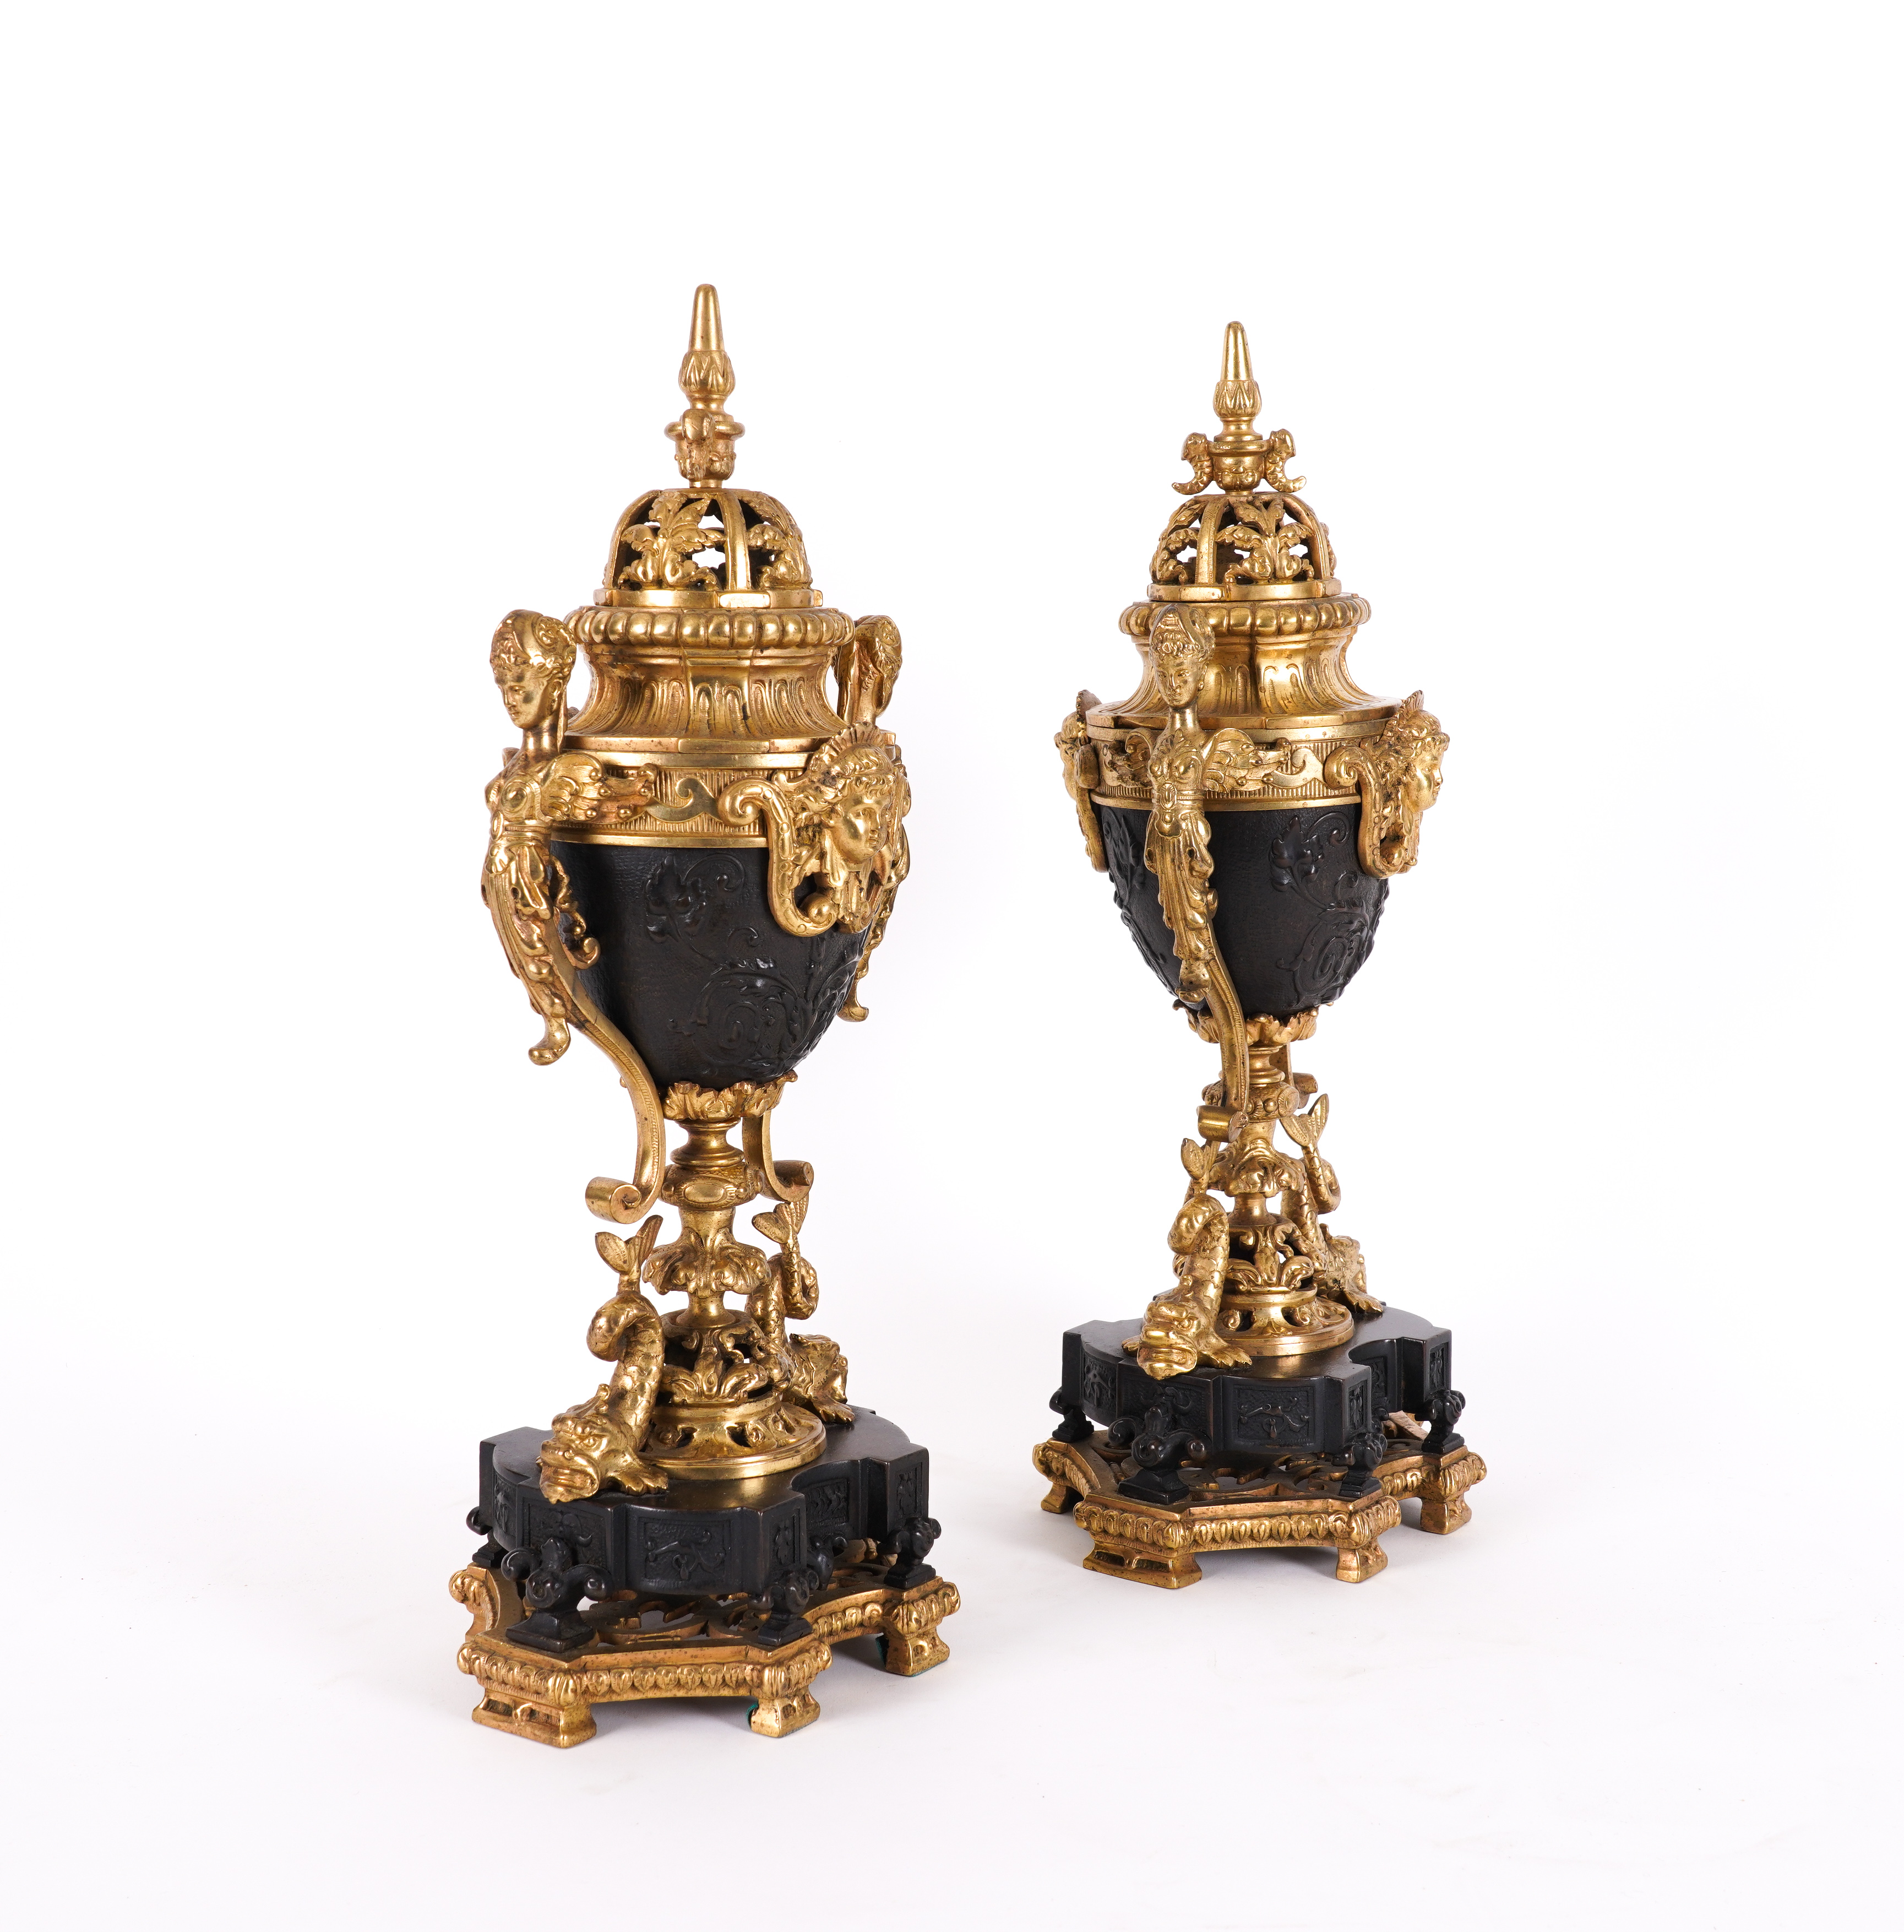 A PAIR OF REGENCE STYLE GILT AND PATINATED METAL ORNAMENTAL URNS OR PERFUME BURNERS (2) - Image 2 of 2